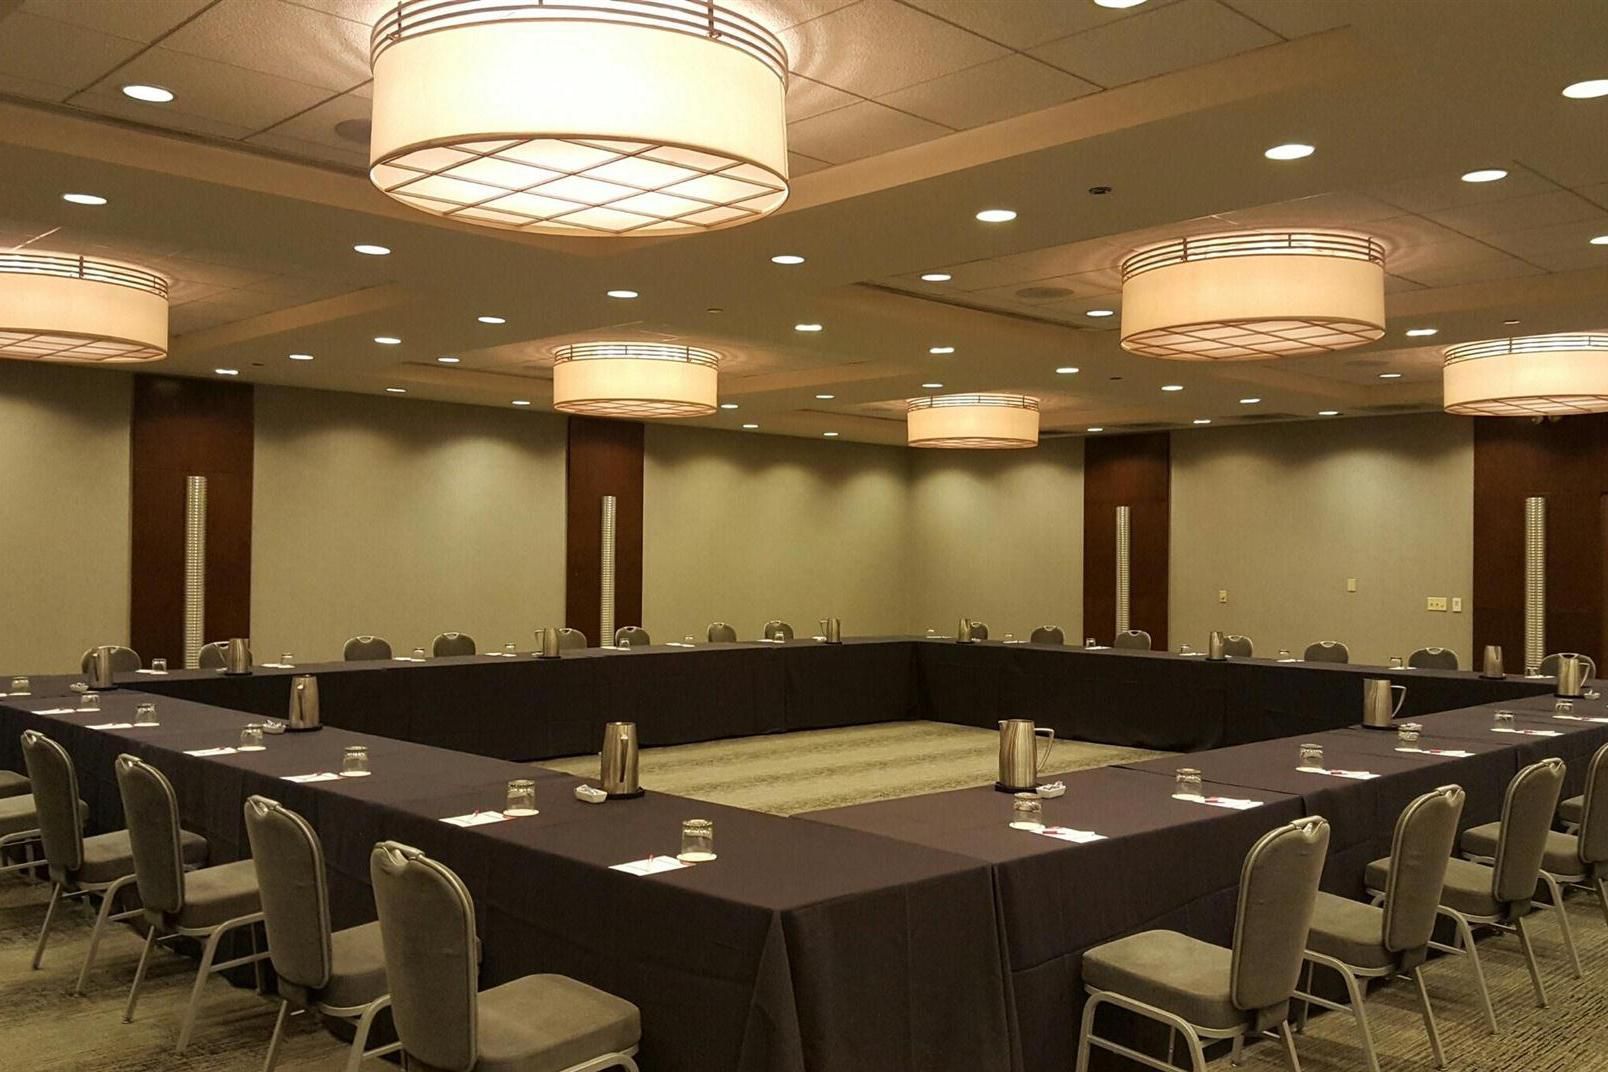 Perfect Chicago West Loop meeting location for groups up to 150pp